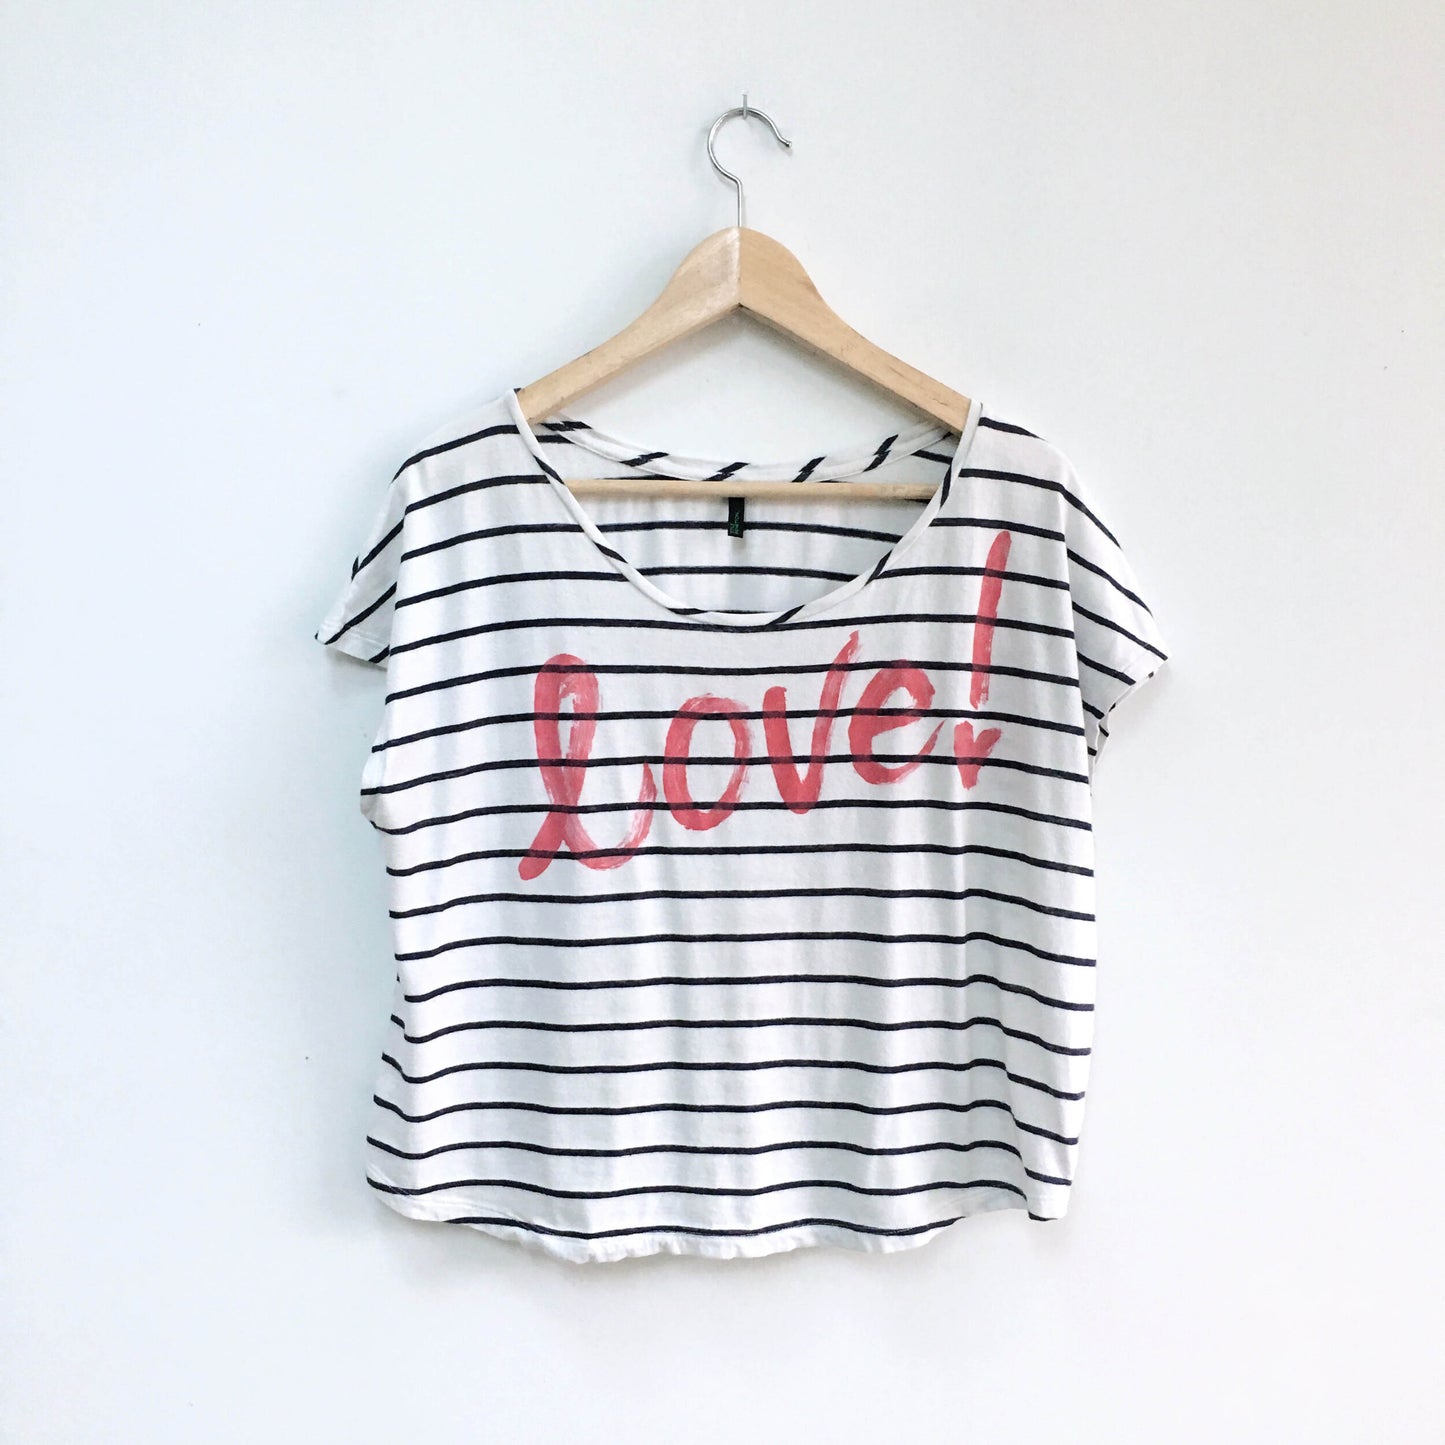 United Colors of Benetton Linen Love Tee - size Sm/M